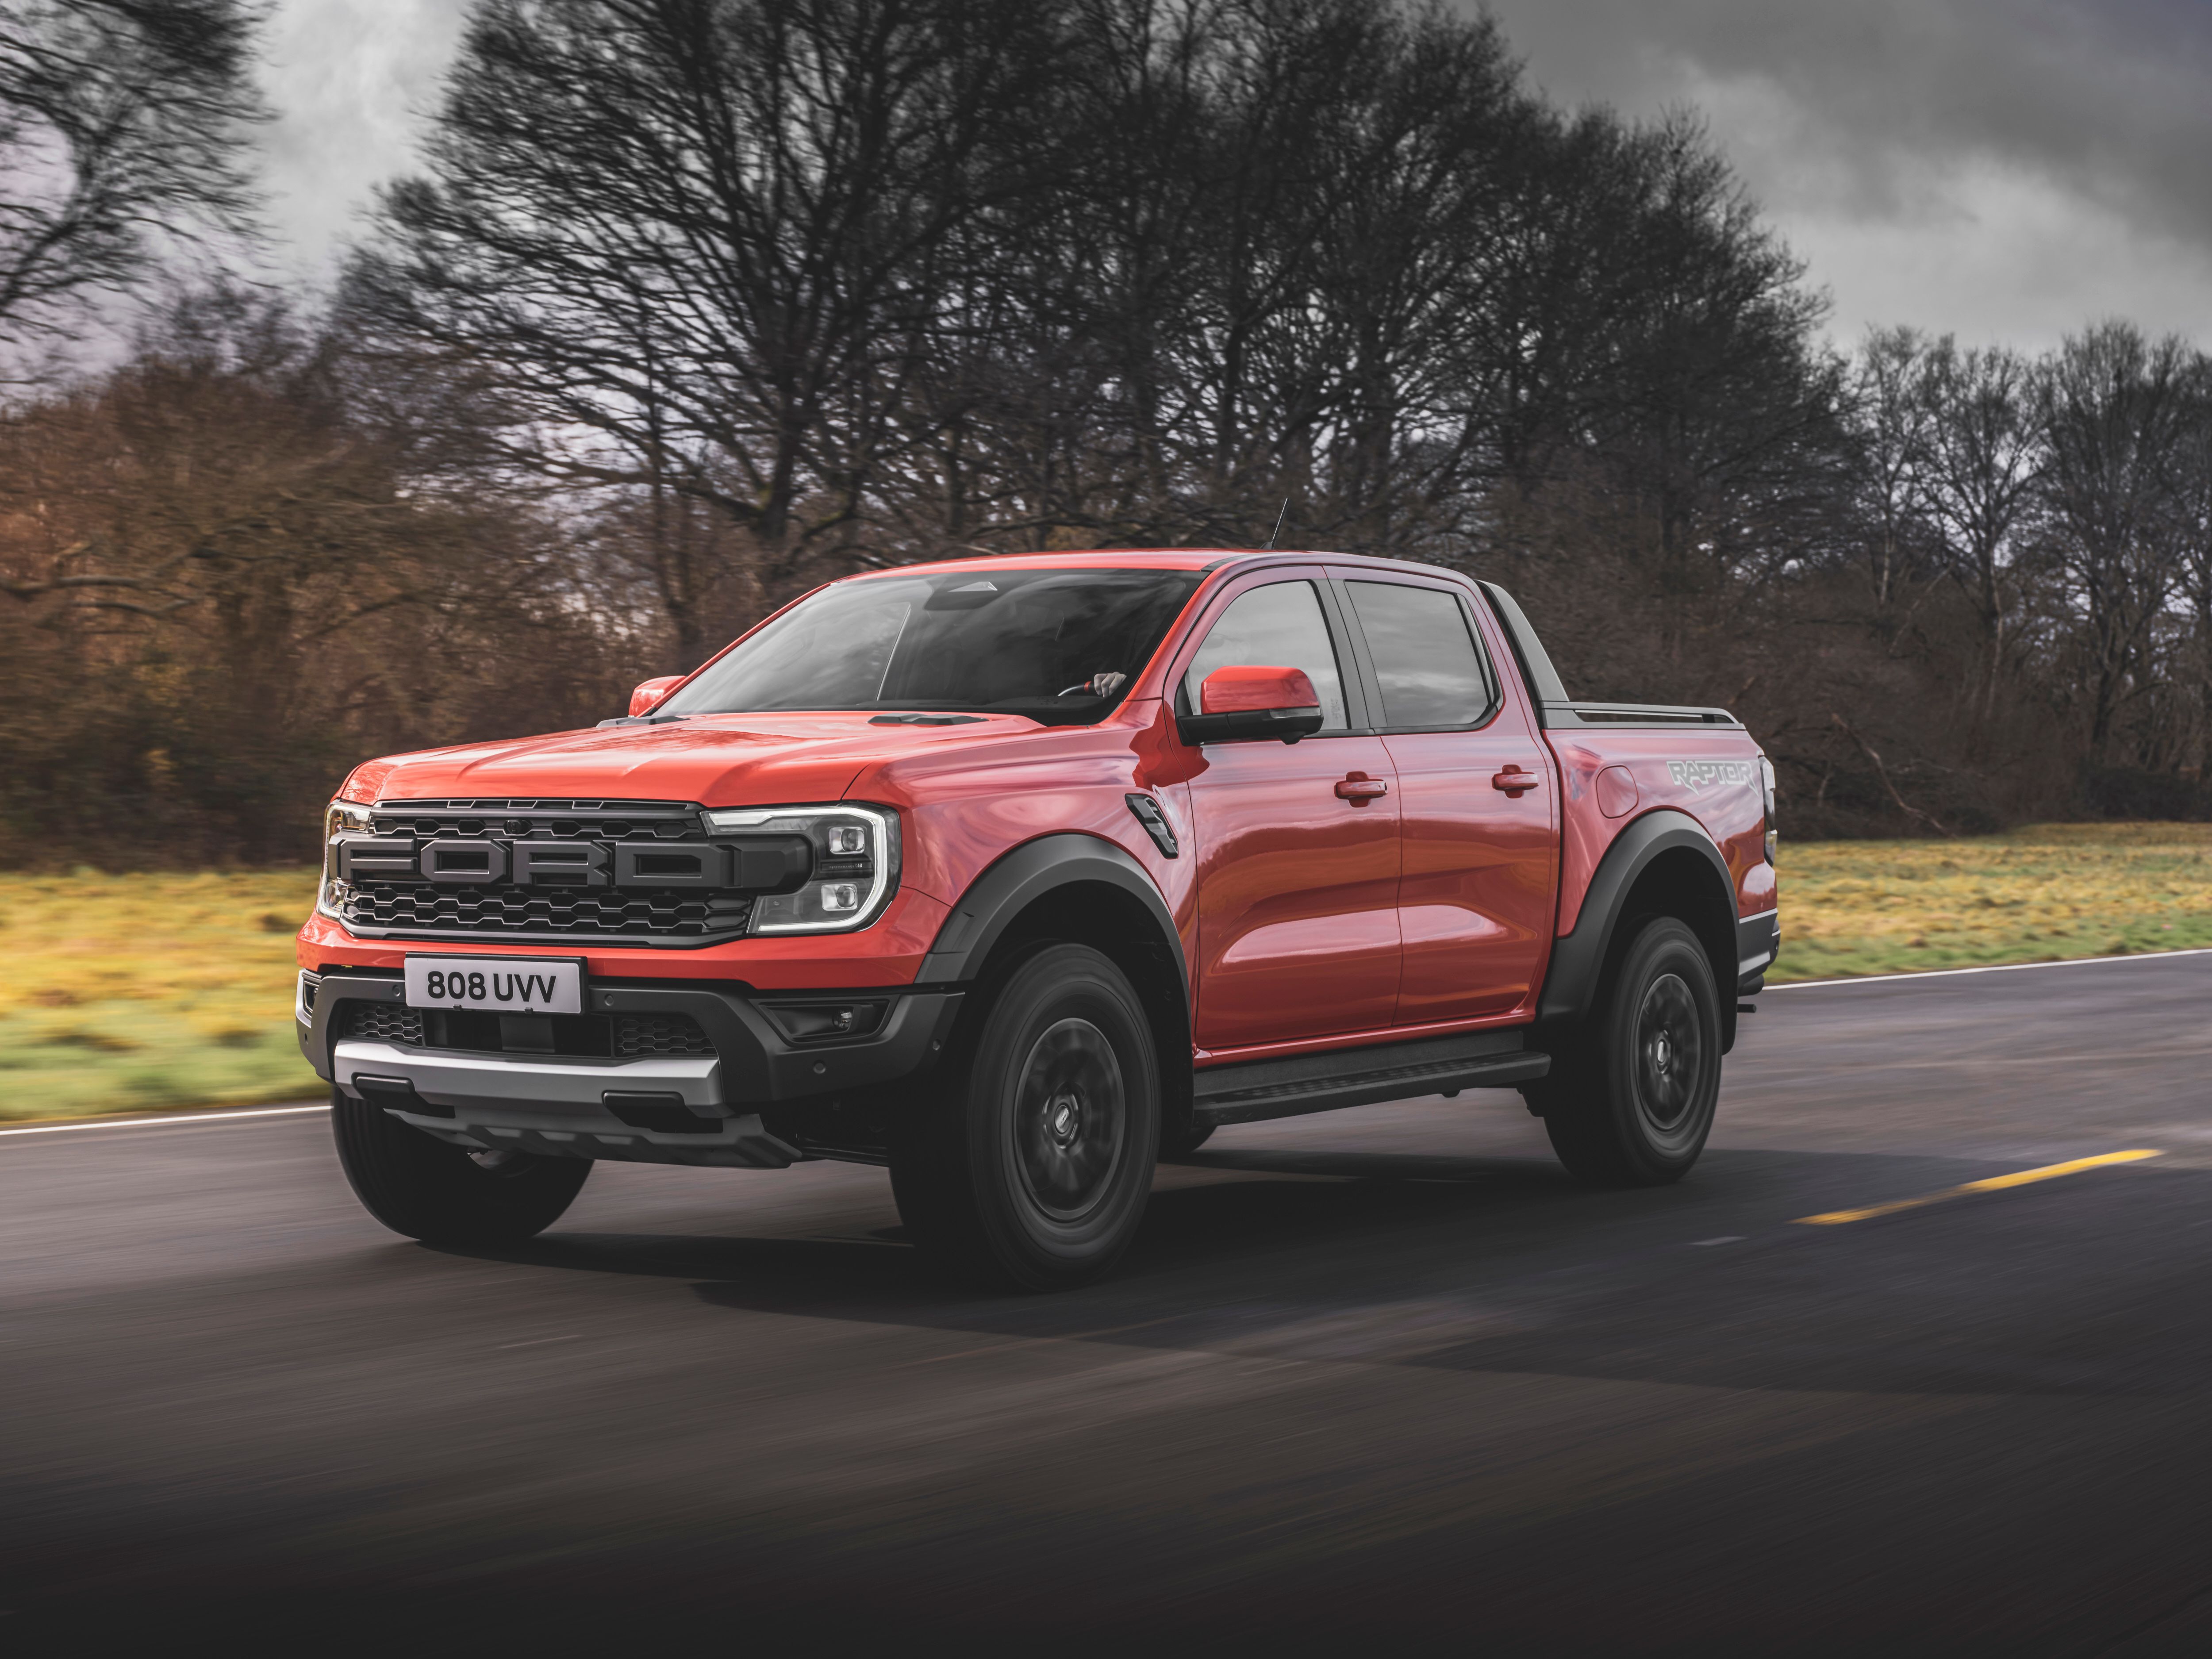 The AllNew 2023 Ford Ranger Raptor Debuts With A V6 Engine, Upgraded